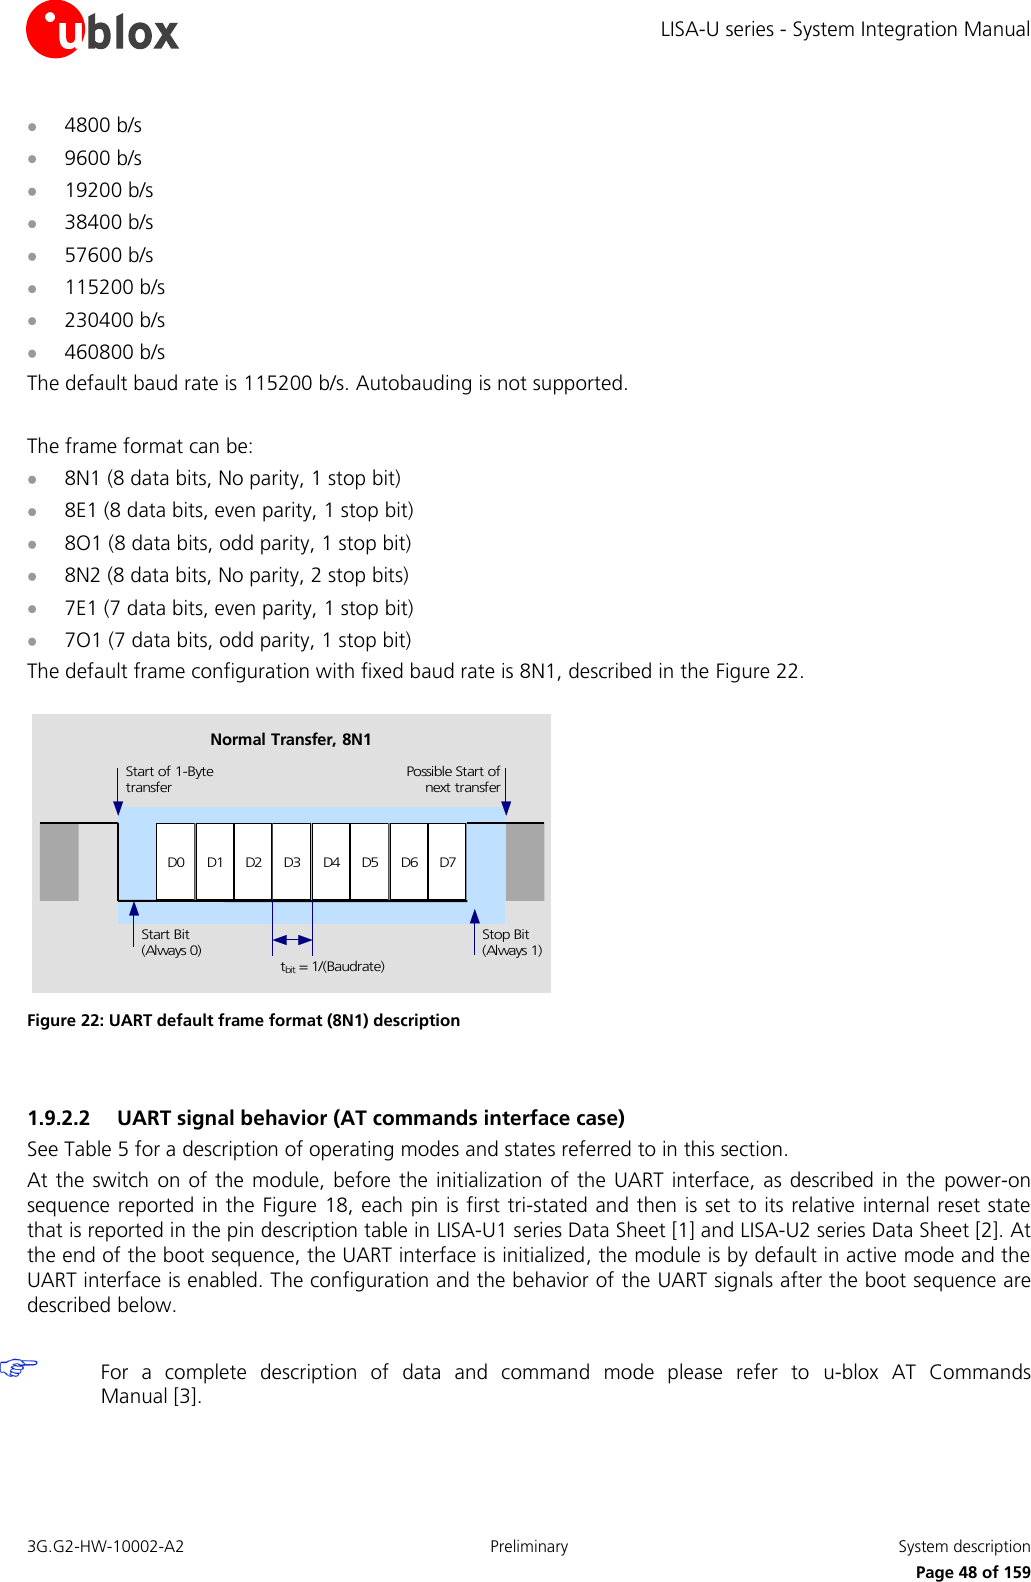 LISA-U series - System Integration Manual 3G.G2-HW-10002-A2  Preliminary  System description      Page 48 of 159  4800 b/s  9600 b/s  19200 b/s  38400 b/s  57600 b/s  115200 b/s  230400 b/s  460800 b/s The default baud rate is 115200 b/s. Autobauding is not supported.  The frame format can be:  8N1 (8 data bits, No parity, 1 stop bit)  8E1 (8 data bits, even parity, 1 stop bit)  8O1 (8 data bits, odd parity, 1 stop bit)  8N2 (8 data bits, No parity, 2 stop bits)  7E1 (7 data bits, even parity, 1 stop bit)  7O1 (7 data bits, odd parity, 1 stop bit) The default frame configuration with fixed baud rate is 8N1, described in the Figure 22. D0 D1 D2 D3 D4 D5 D6 D7Start of 1-BytetransferStart Bit(Always 0)Possible Start ofnext transferStop Bit(Always 1)tbit = 1/(Baudrate)Normal Transfer, 8N1 Figure 22: UART default frame format (8N1) description  1.9.2.2 UART signal behavior (AT commands interface case) See Table 5 for a description of operating modes and states referred to in this section. At the switch on of the  module, before the initialization of the  UART interface, as described in the  power-on sequence reported in the Figure 18, each pin is first tri-stated and then is set to its relative internal reset state that is reported in the pin description table in LISA-U1 series Data Sheet [1] and LISA-U2 series Data Sheet [2]. At the end of the boot sequence, the UART interface is initialized, the module is by default in active mode and the UART interface is enabled. The configuration and the behavior of the UART signals after the boot sequence are described below.   For  a  complete  description  of  data  and  command  mode  please  refer  to  u-blox  AT  Commands Manual [3].  